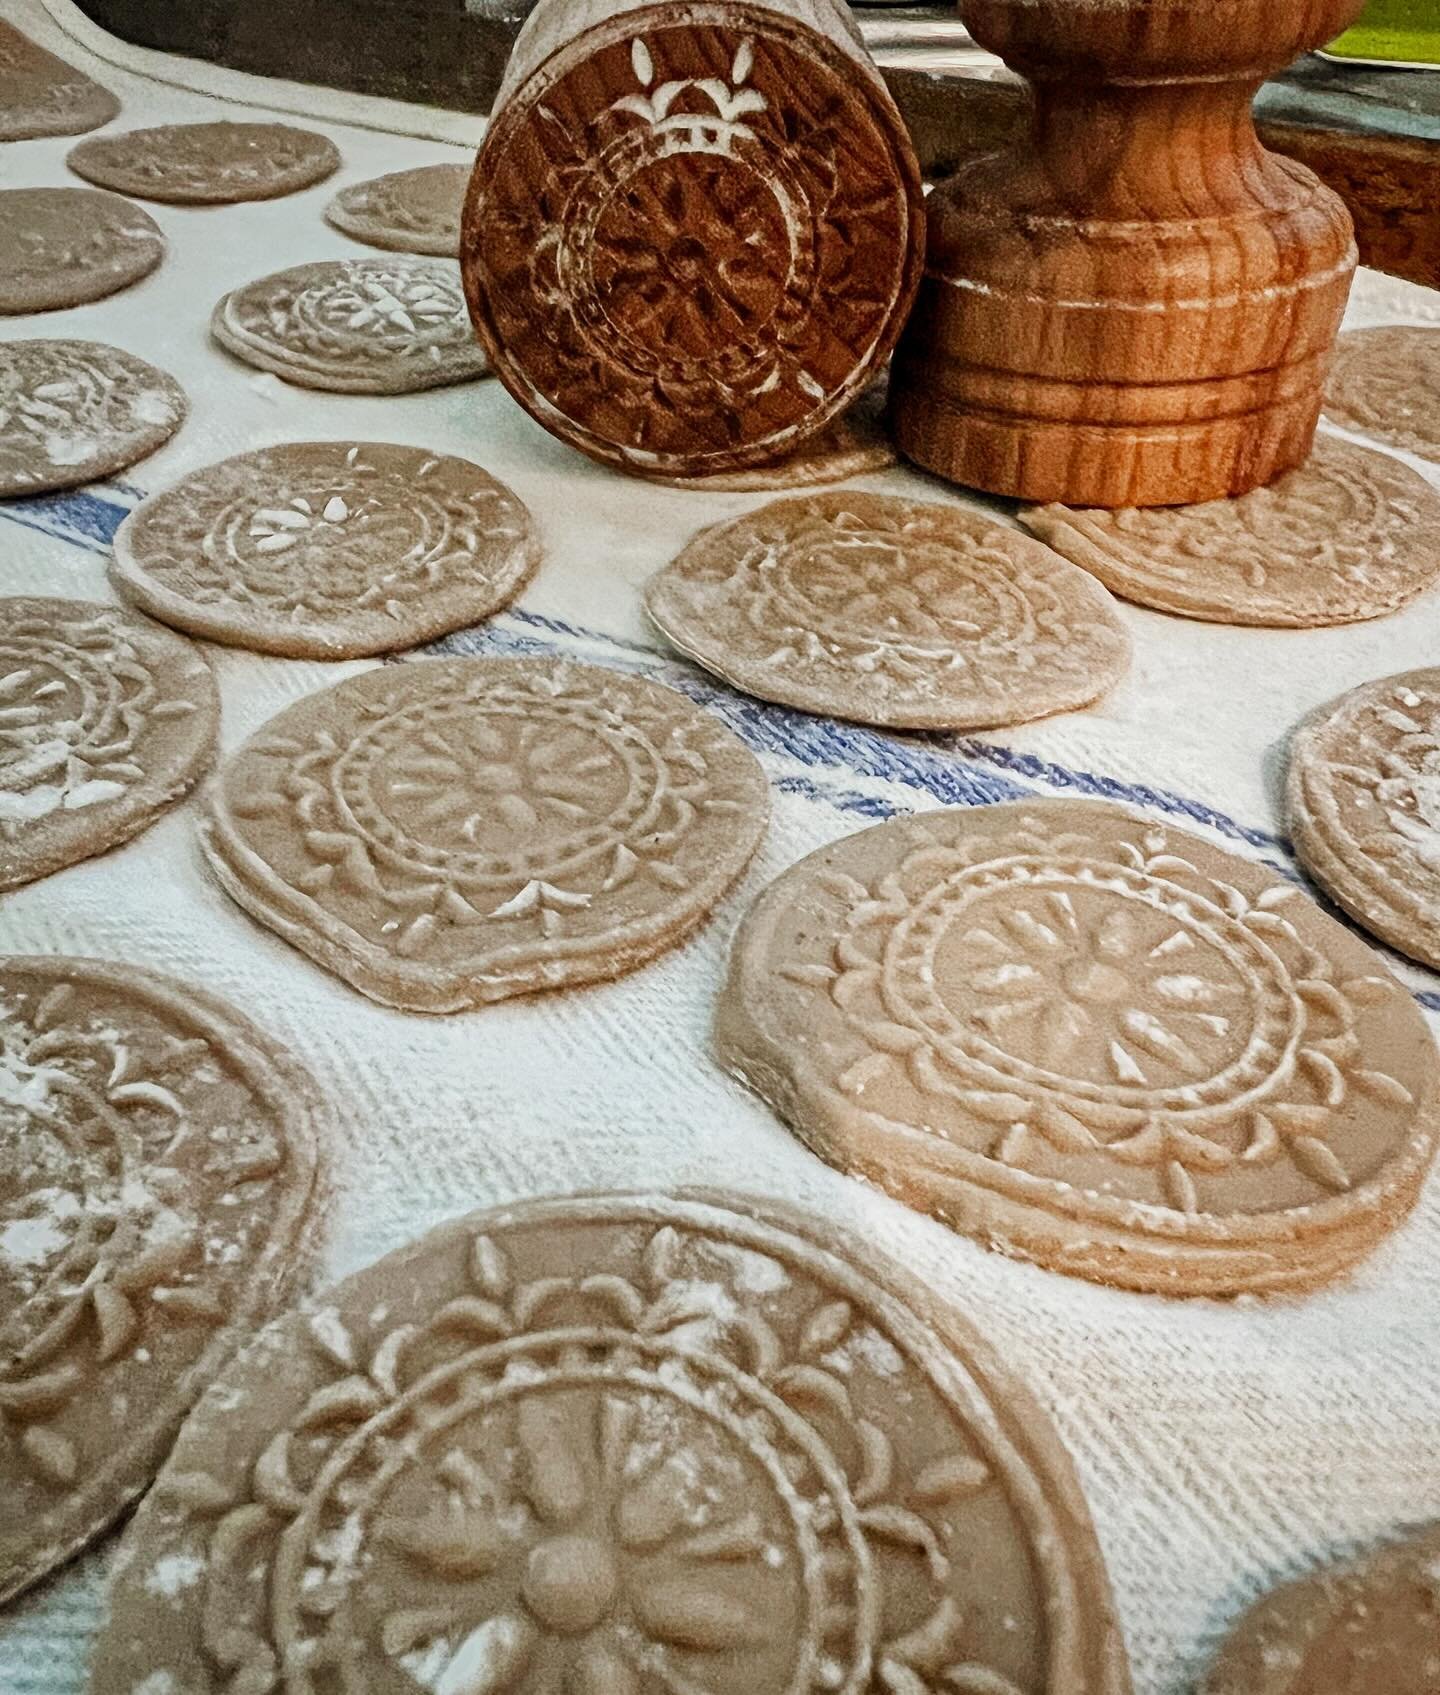 It&rsquo;s pasta night with a salute to my days in Liguria with Corzetti - chestnut flour pasta cut into discs and impressed with a hand-carved stamp for a design that is perfect for holding pesto Genovese. I think a chilled Vermentino will be just r